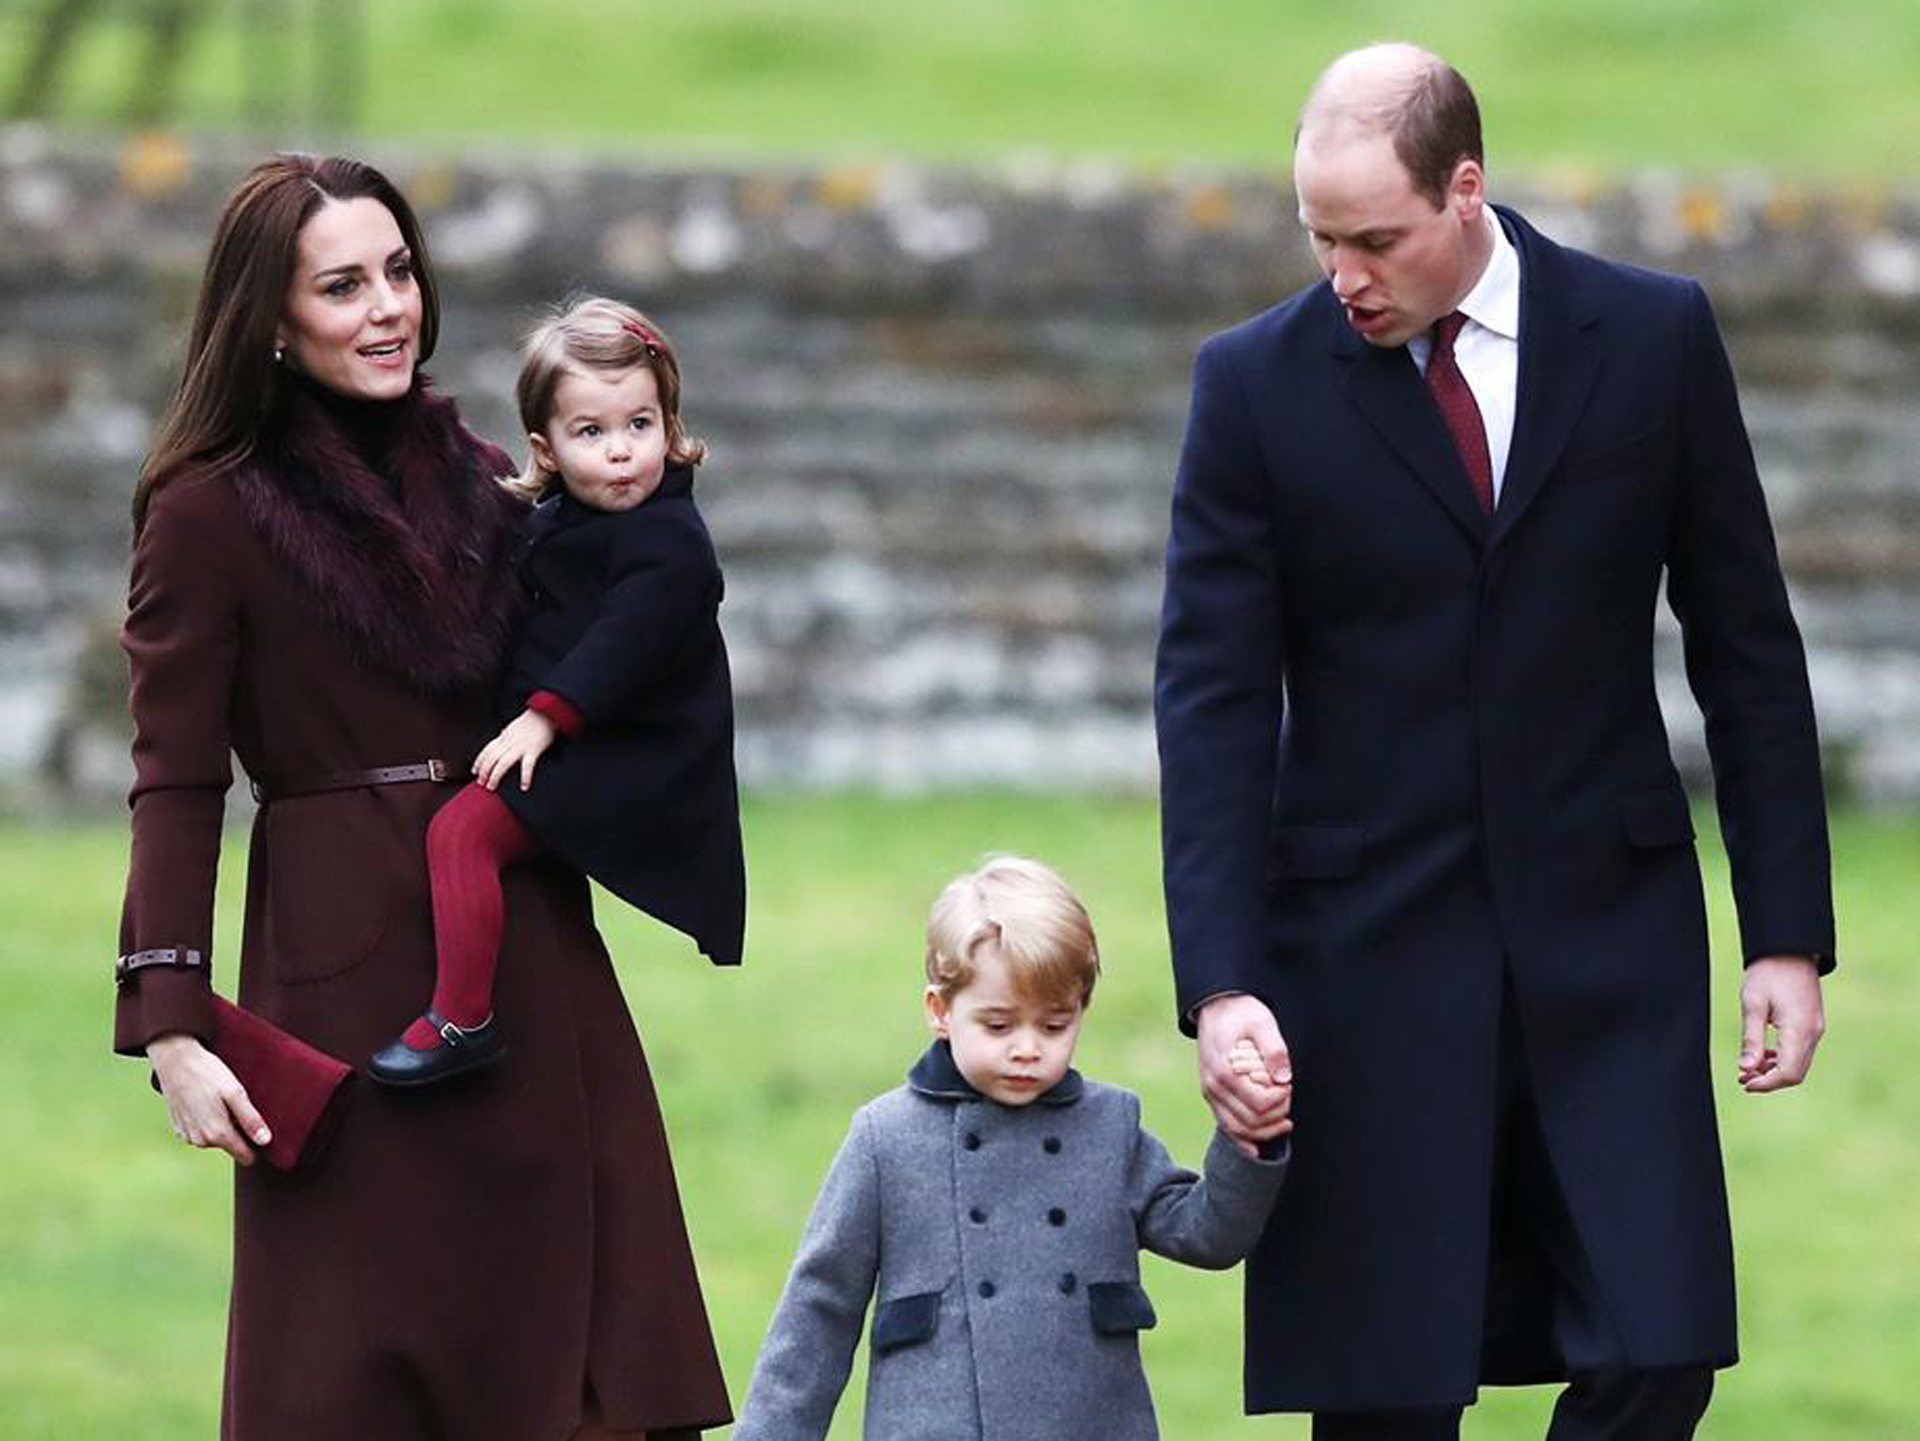 Kate Middleton and Prince William to move to London